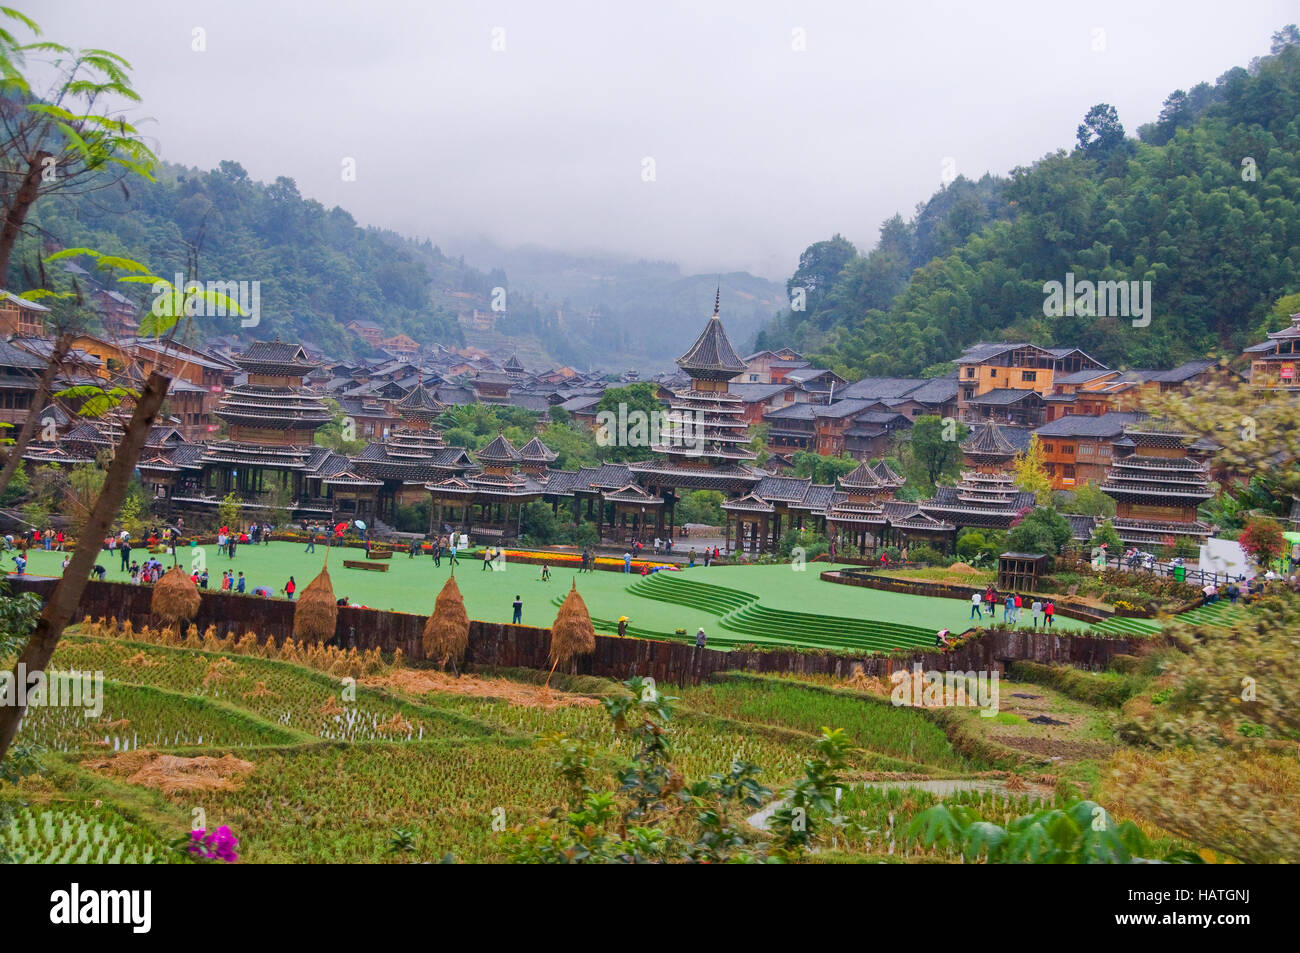 The Zhaoxing Dong Village in Guizhou Province of China is an interesting cultural destination. Stock Photo